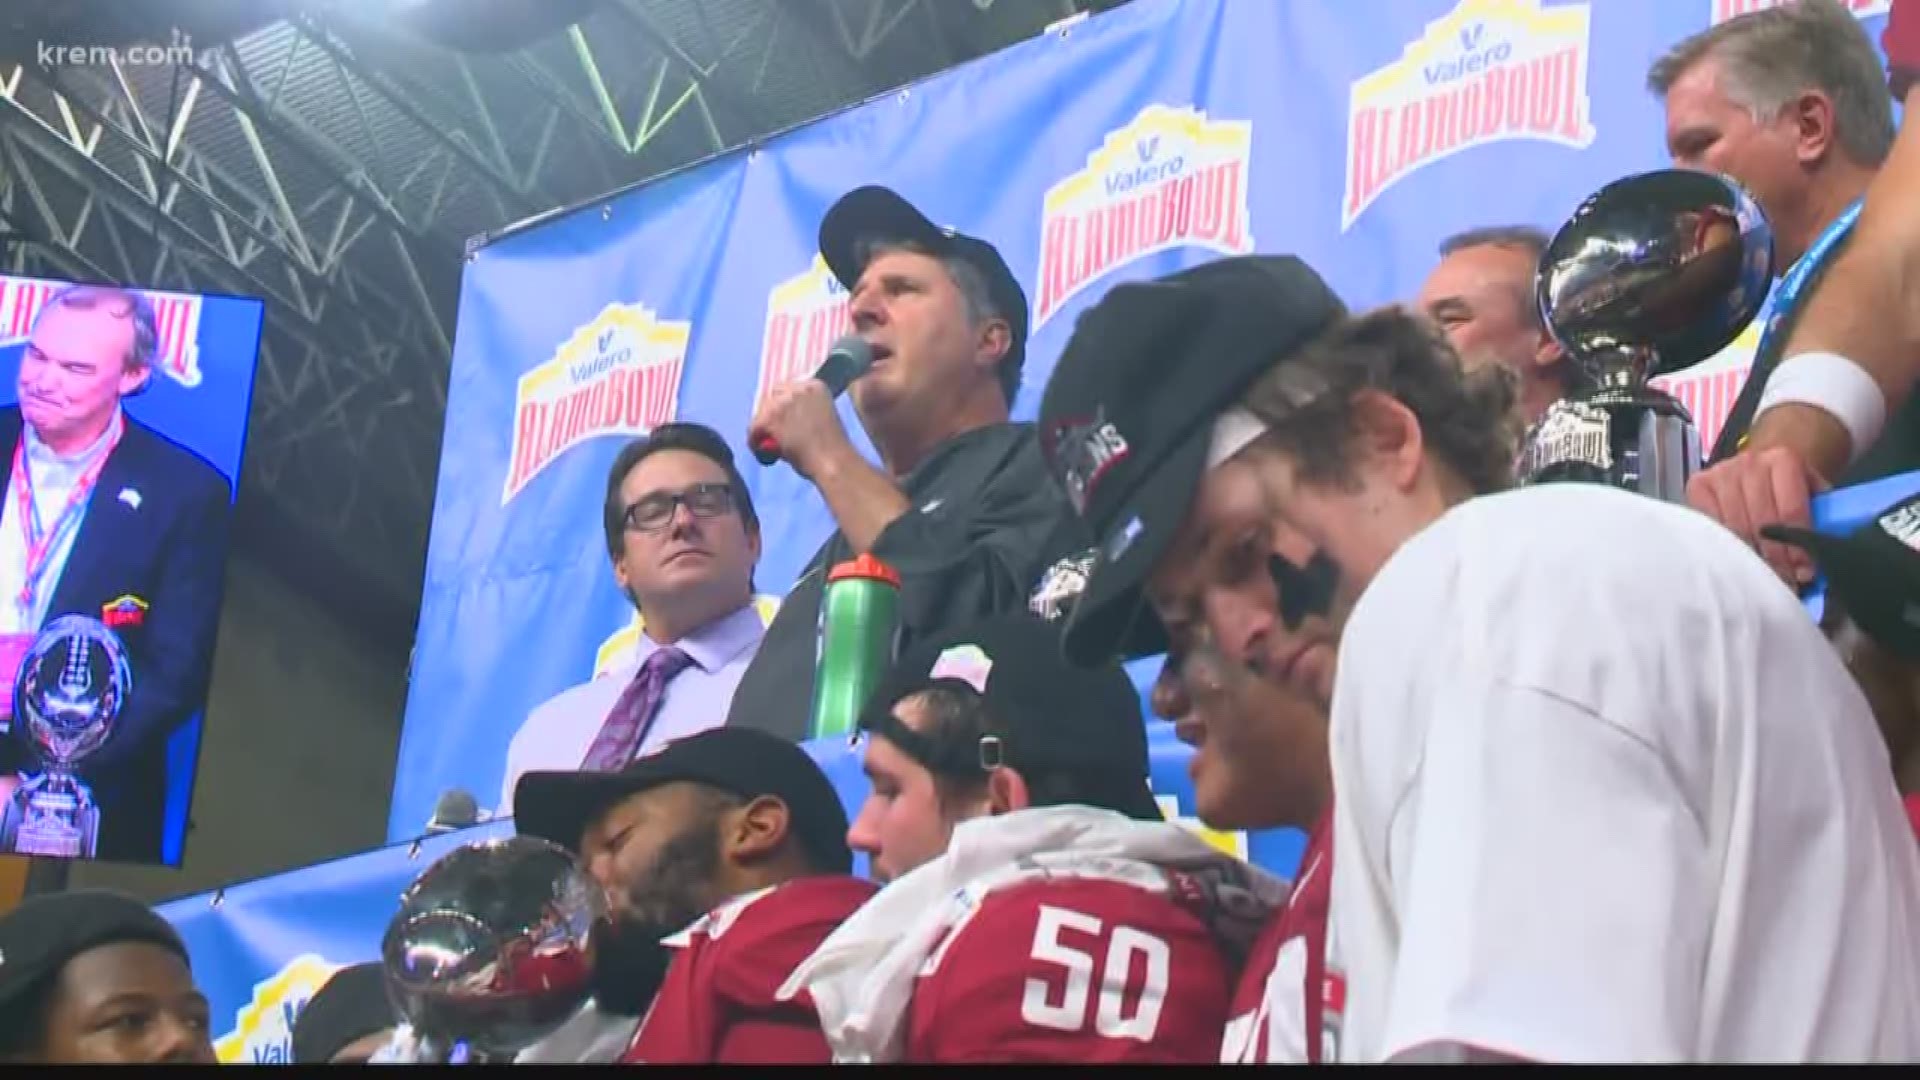 Brenna Greene shows us the sights and sounds of the Coug's 11th win at the Alamo Bowl against Iowa State.